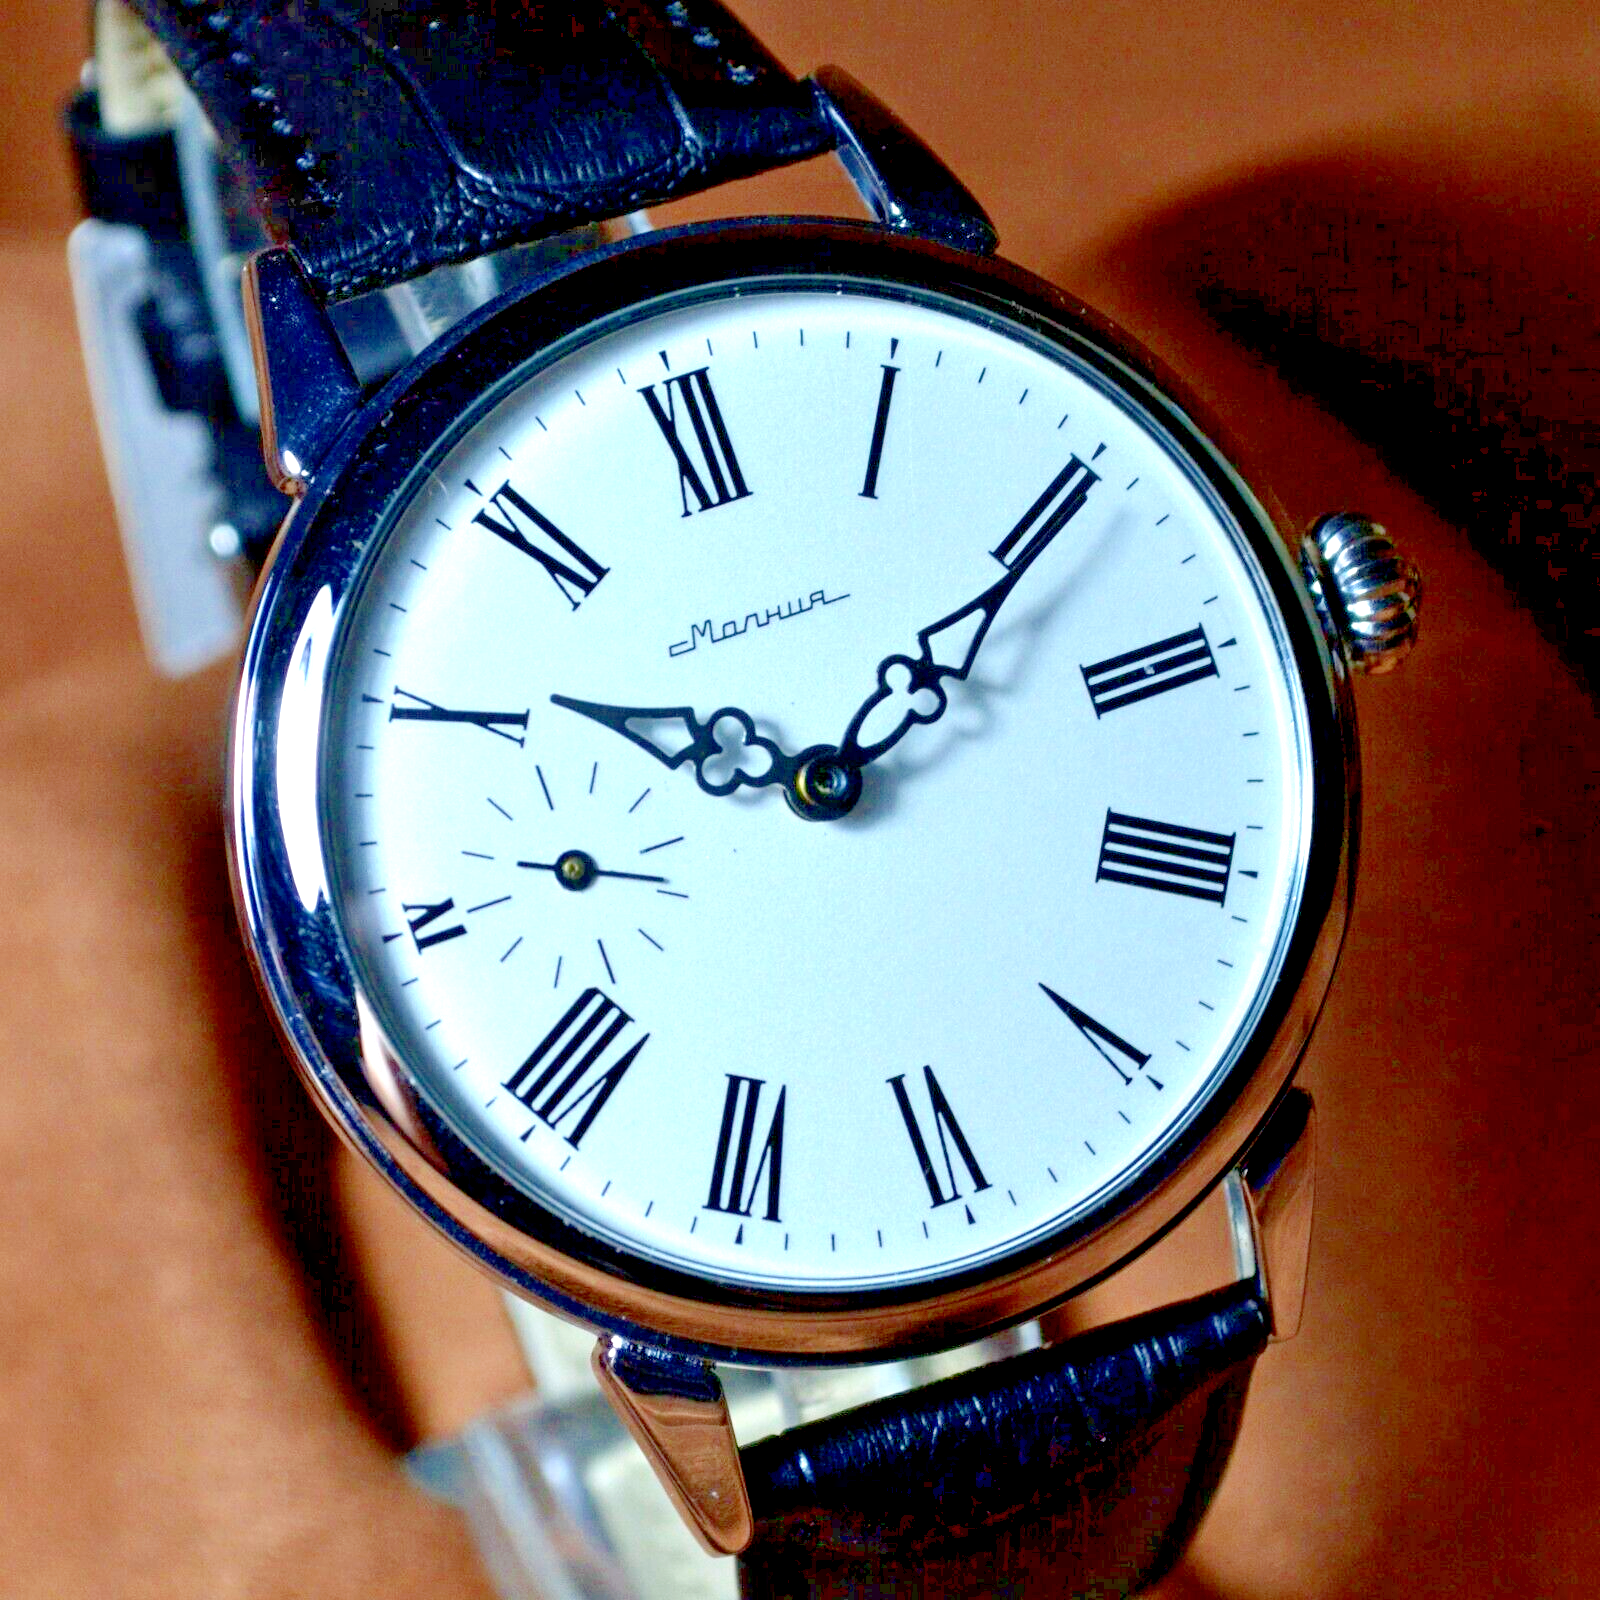 Soviet Watch Marriage Classic Watch Limited Edition Vintage White Watch